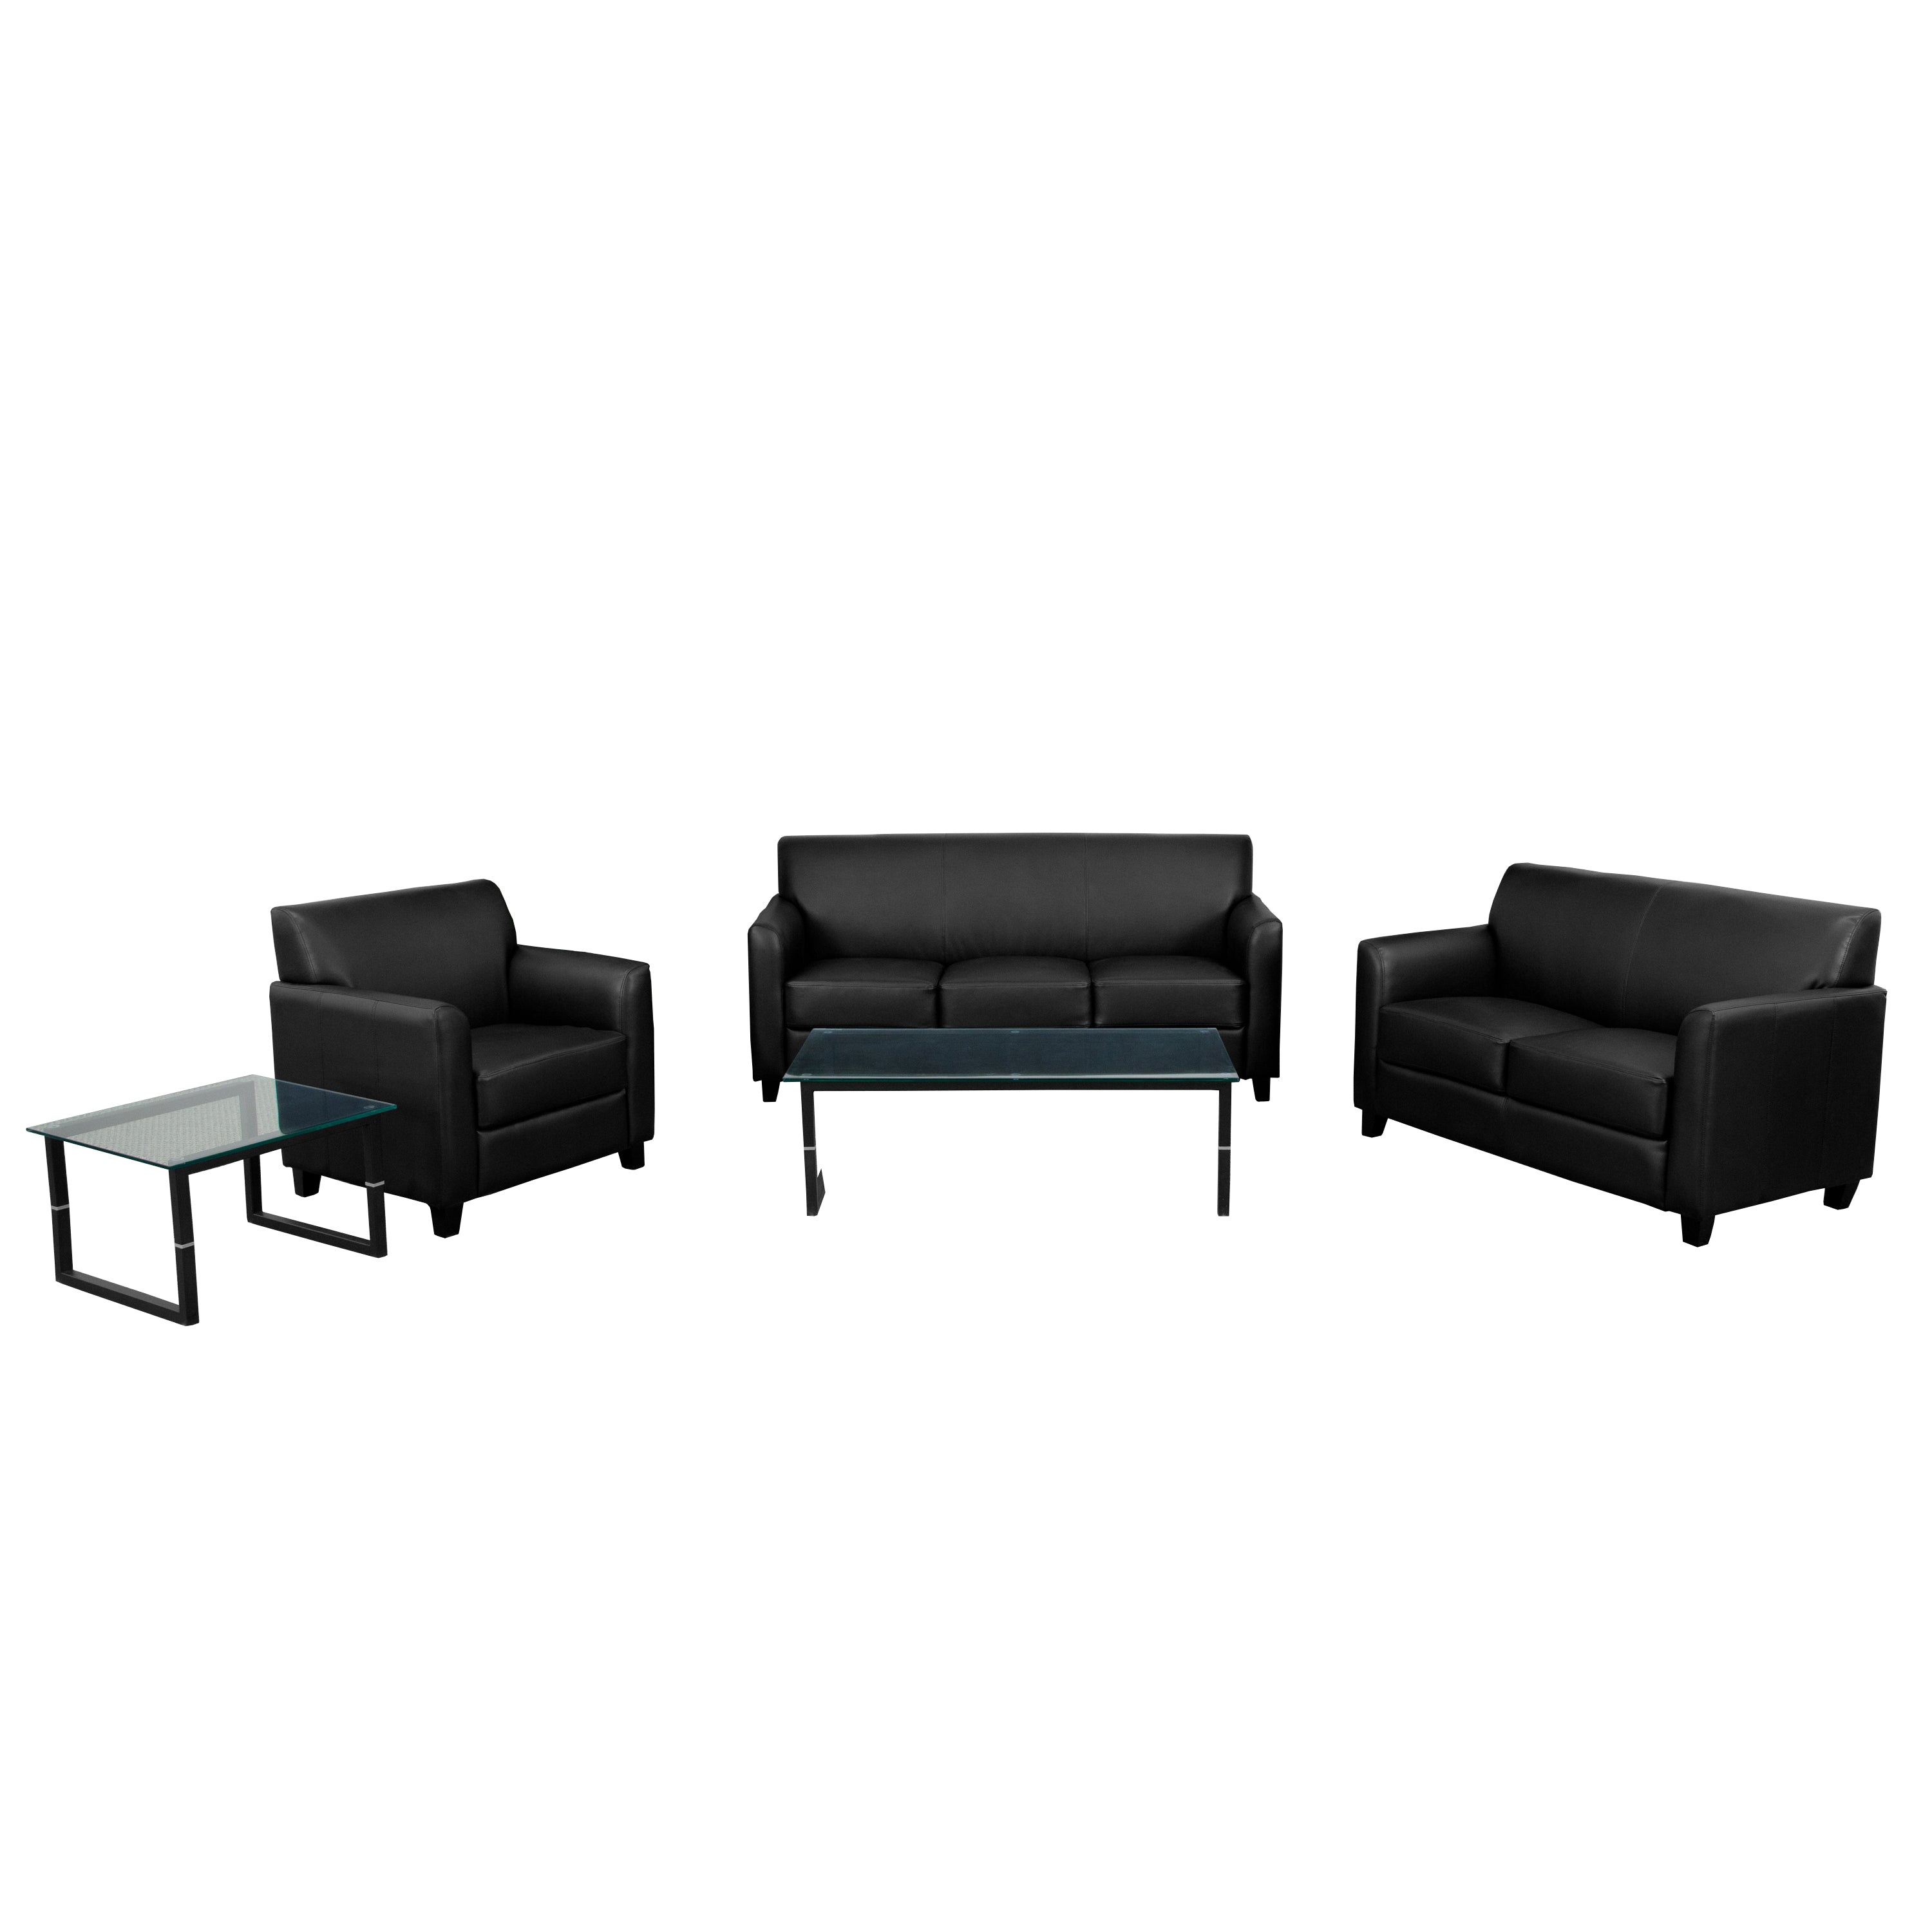 HERCULES Diplomat Series Reception Set with Clean Line Stitched Frame-Reception Set-Flash Furniture-Wall2Wall Furnishings